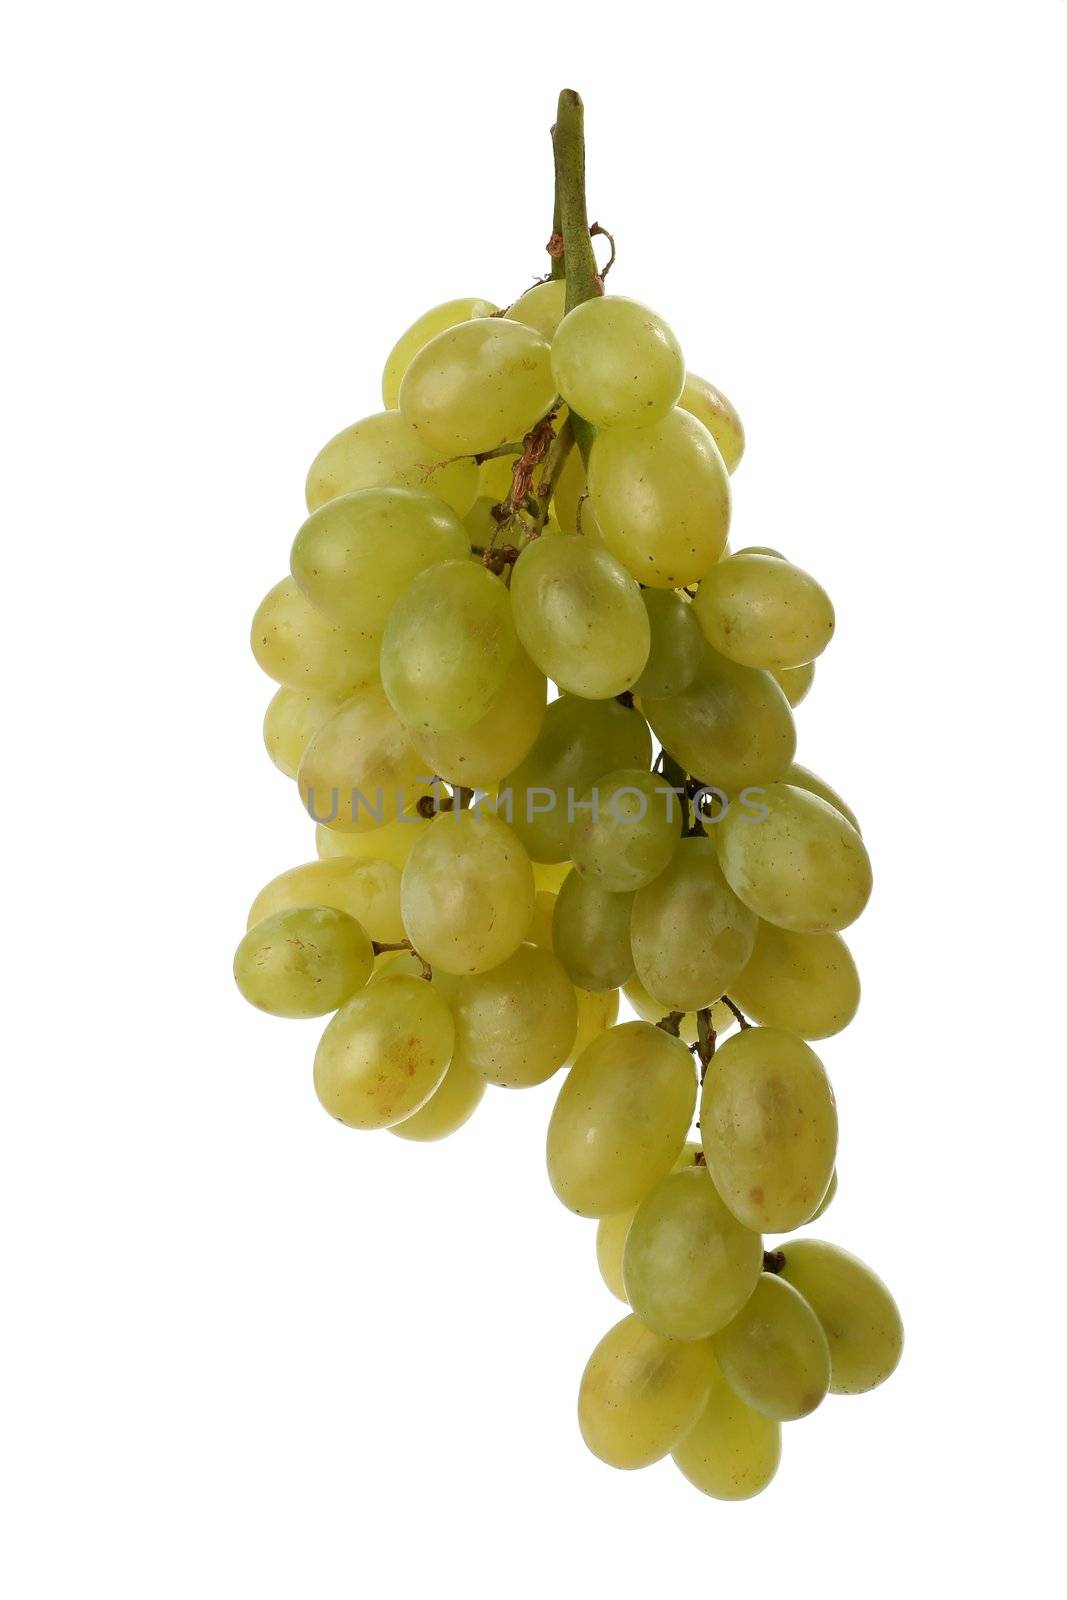 Big bunch of juicy grapes against a white background